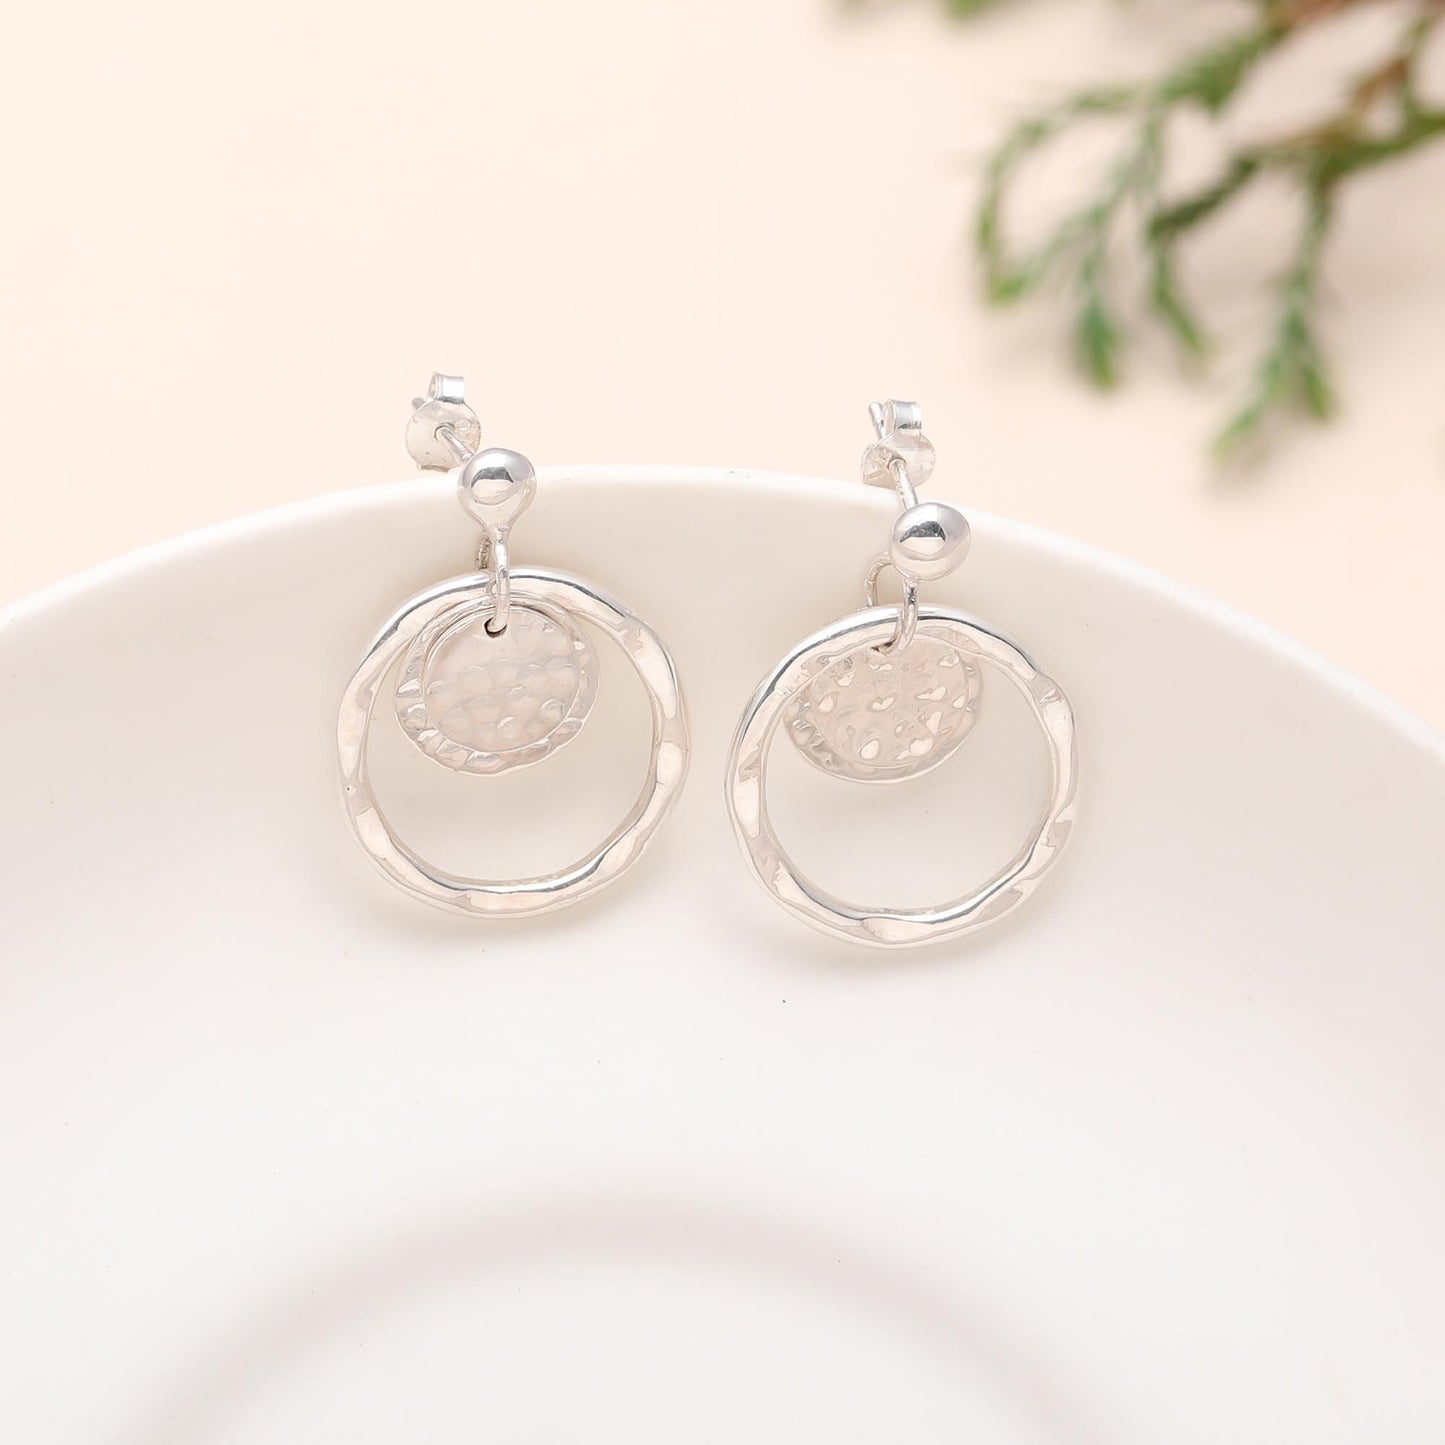 Solid 925 Sterling Silver Handmade Geometric circle Earring in Hammered Texture Stud Earring Wedding /Anniversary & Birthday Gift for her.